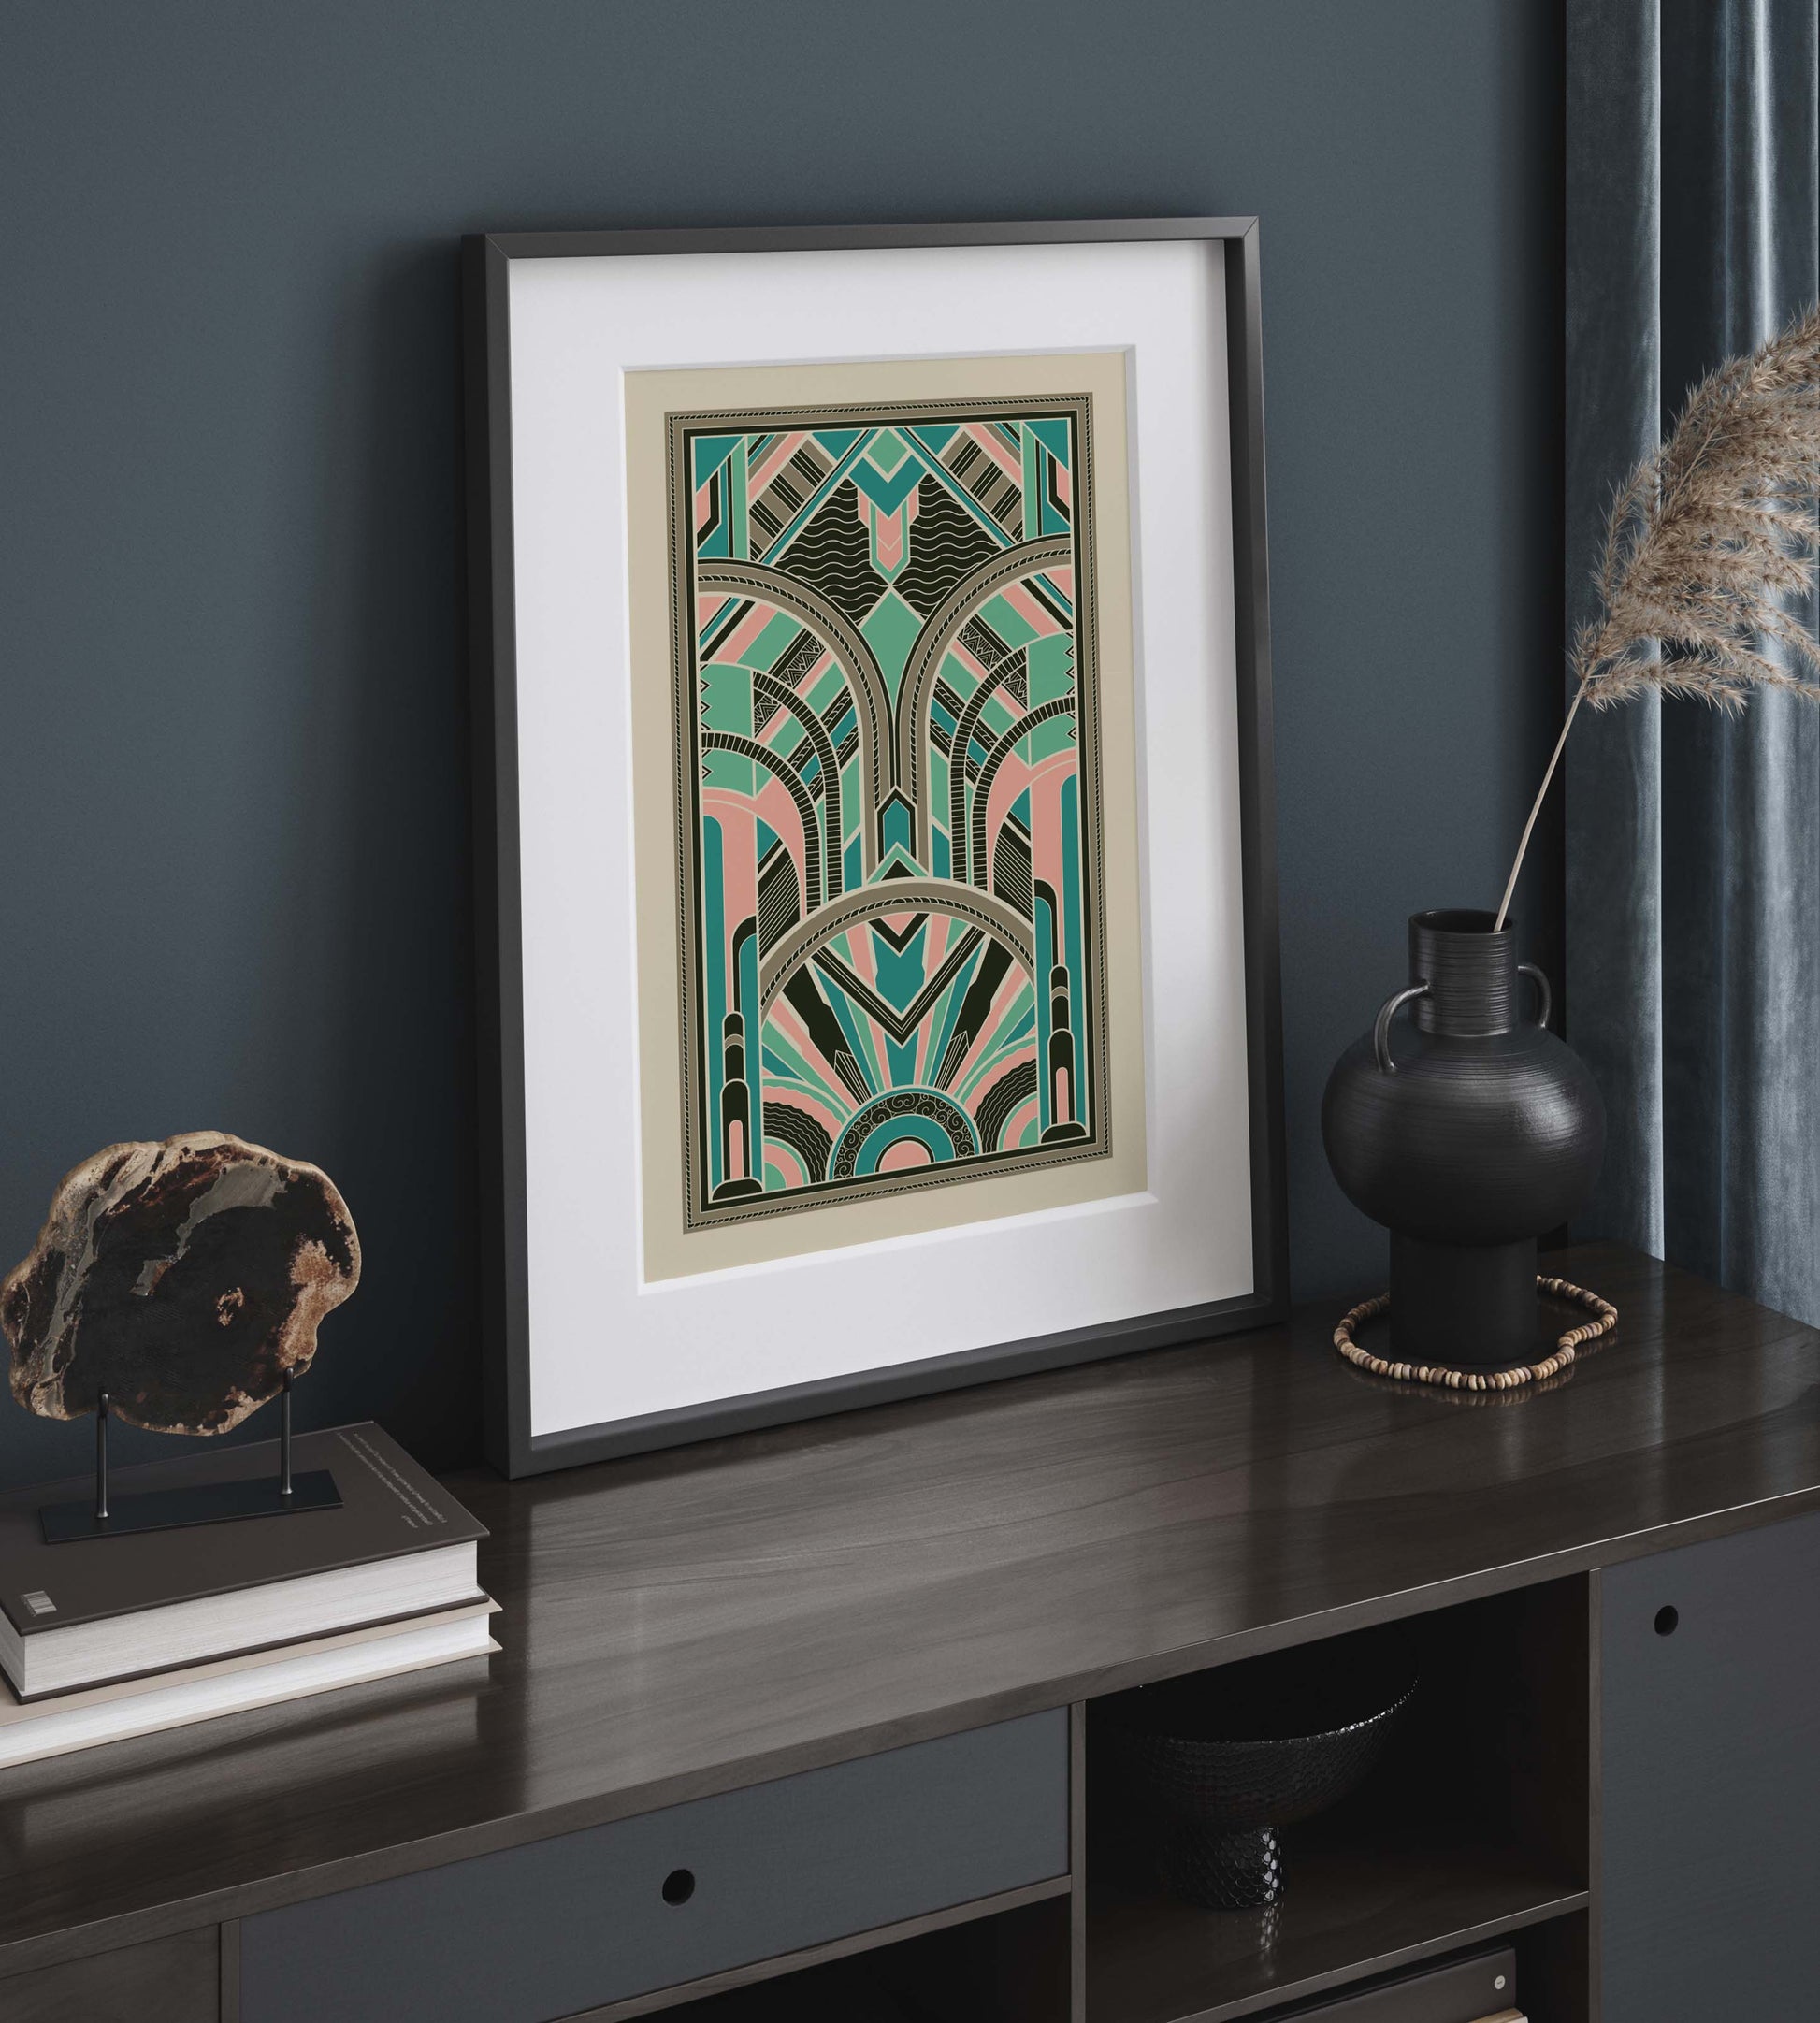 Art deco poster with geometric pattern in pink and teal